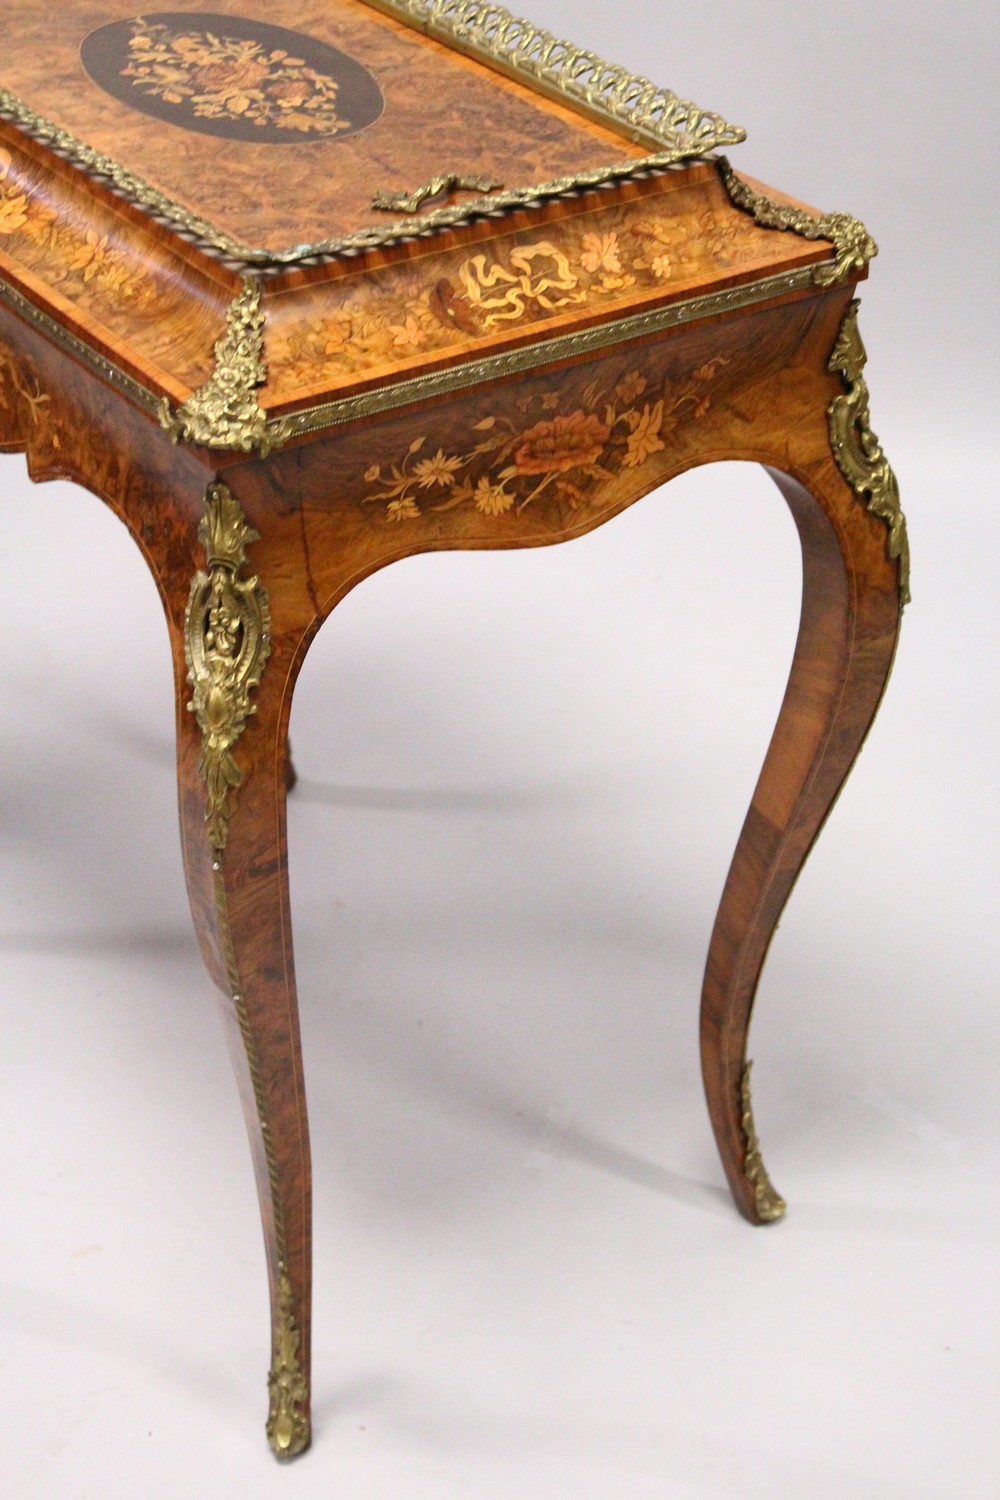 A 19TH CENTURY BURR WALNUT, ORMOLU AND MARQUETRY JARDINIERE, with removable cover, zinc liner, on - Image 8 of 10